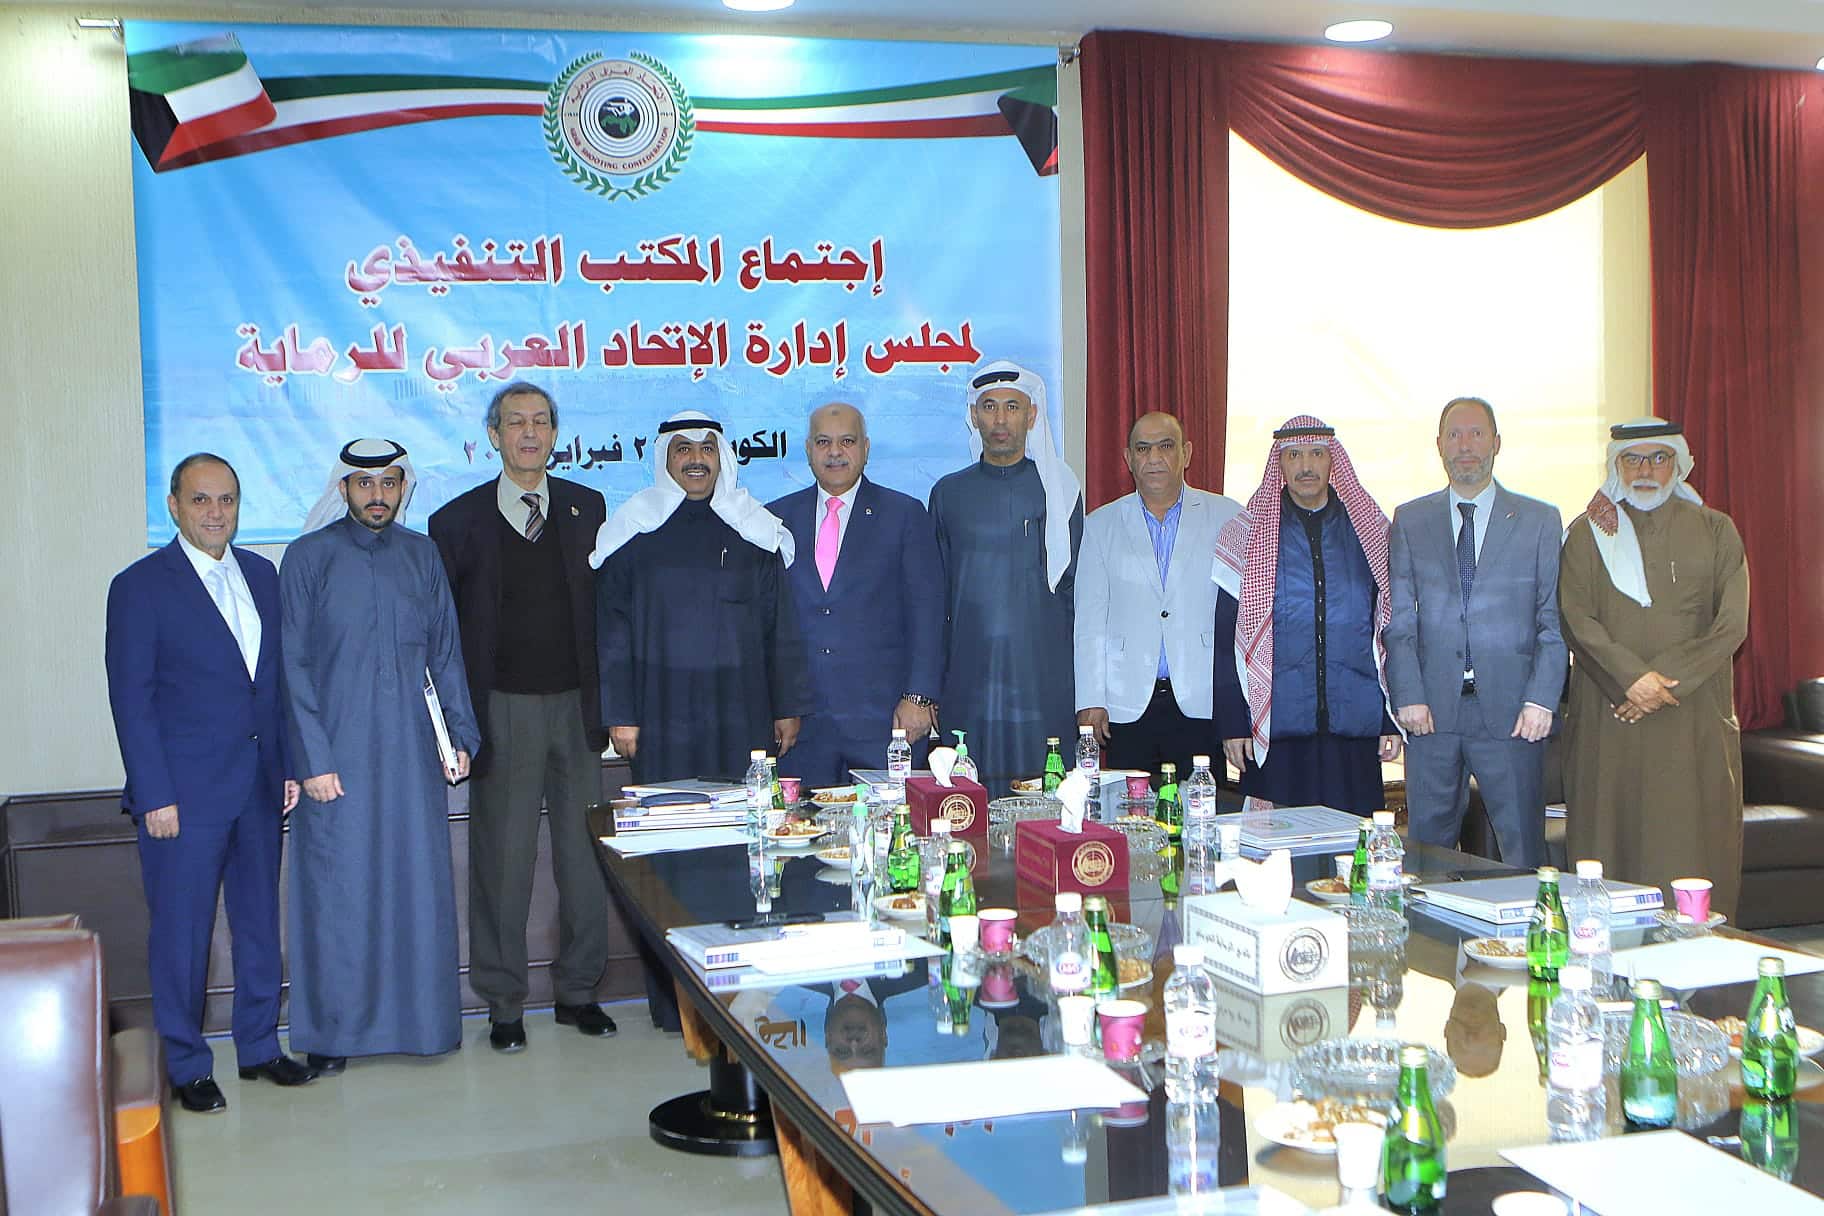 KUWAIT: Arab Shooting Federation General Assembly (ASF) hold its meeting on Tuesday. The ASF General assembly napproved the financial and administrative reports.